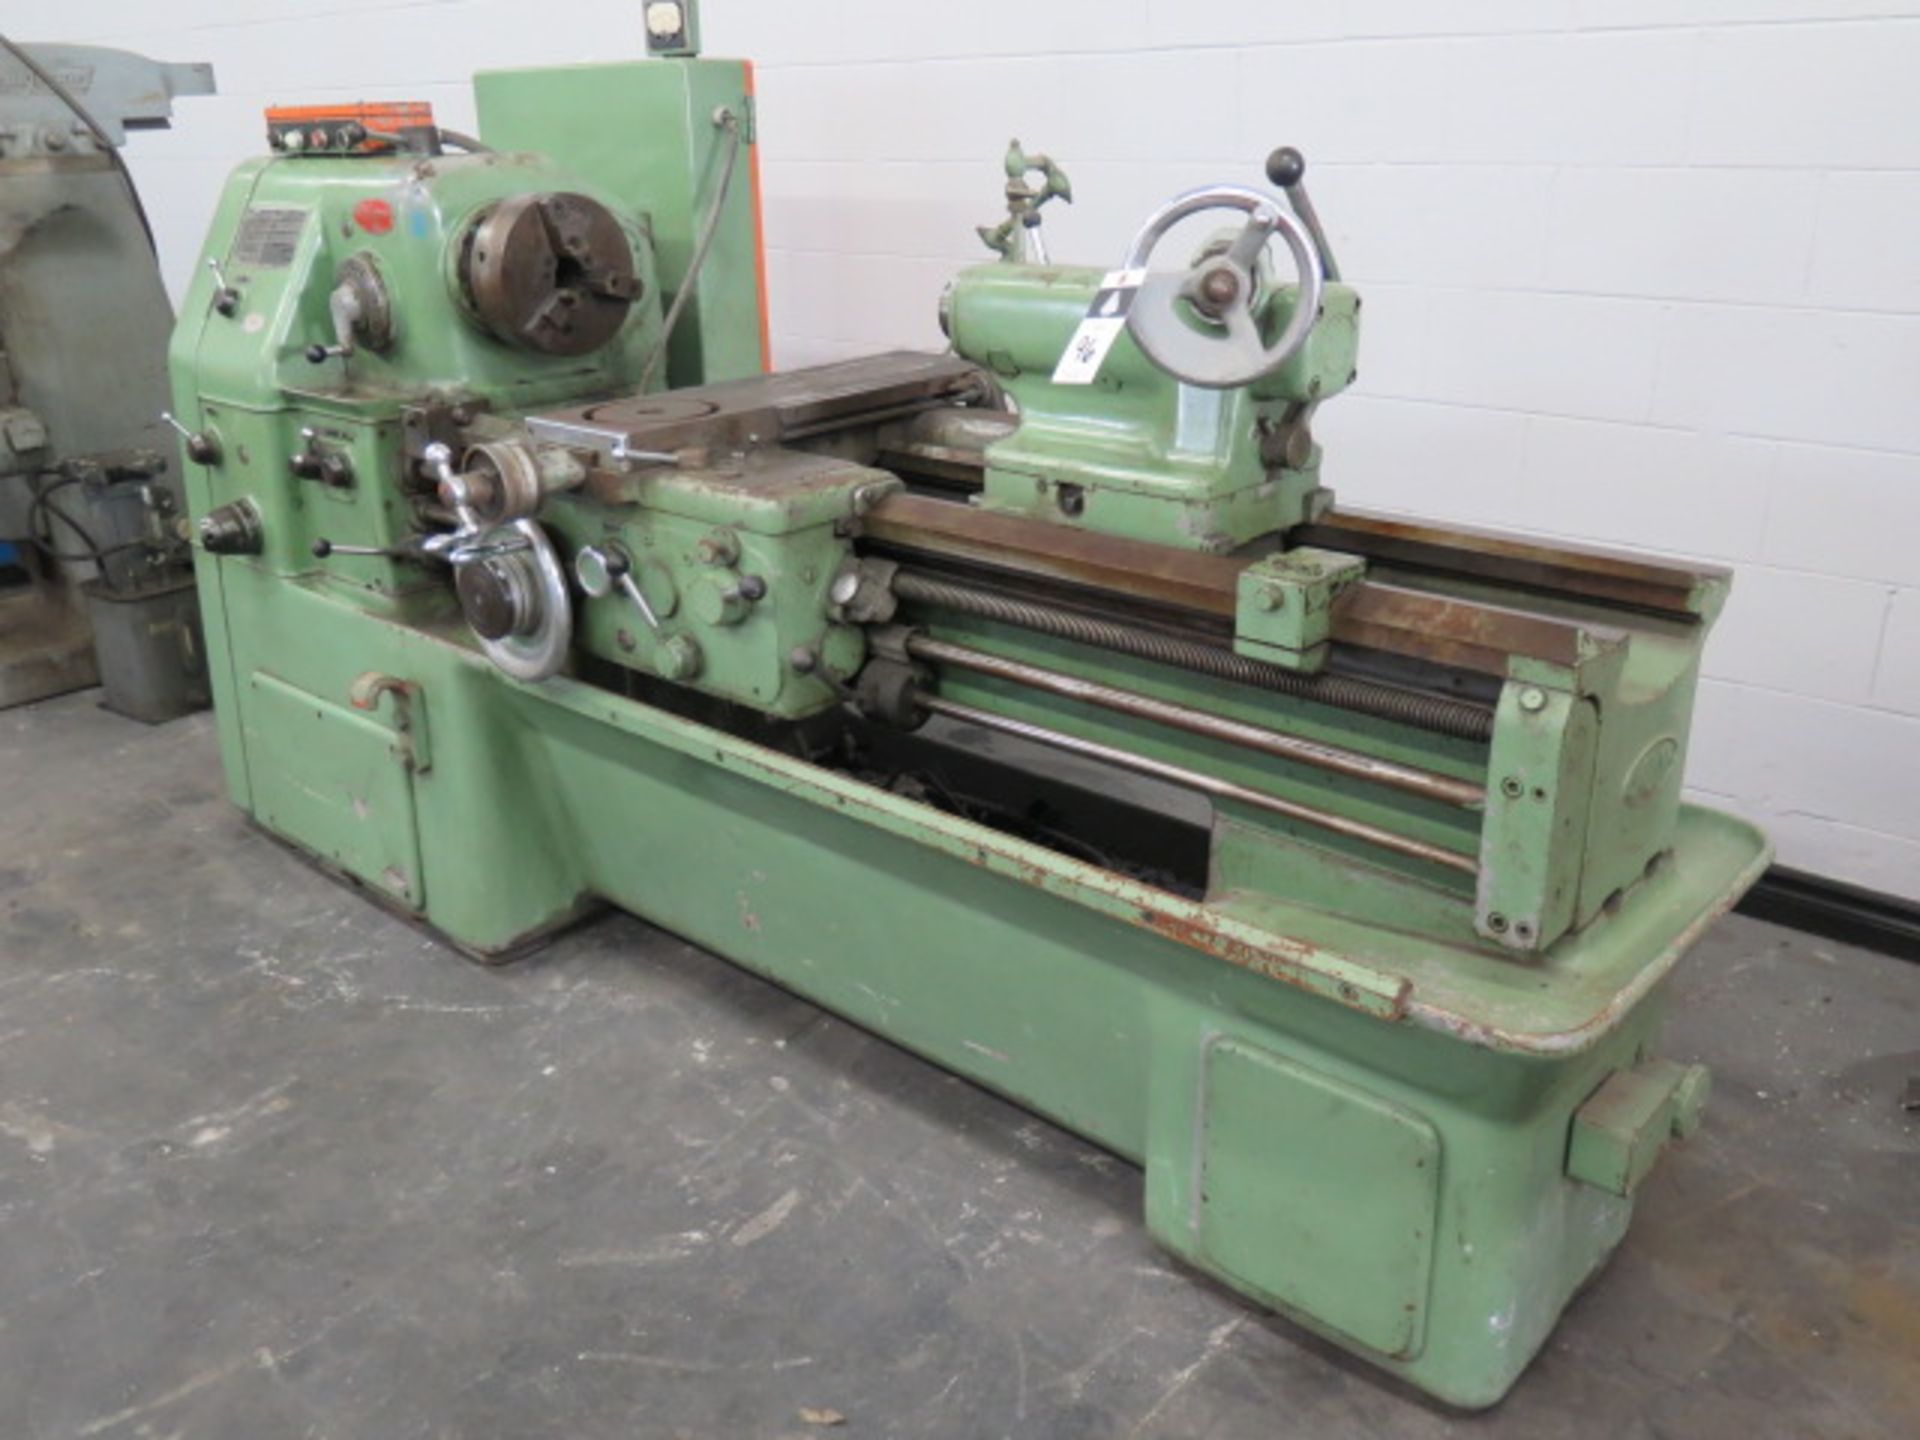 Okuma type LS Gap Bed Lathe (MISSING CROSS SLIDE ASSEMBLY) s/n 4707-3896 w/ SOLD AS IS - Image 2 of 13